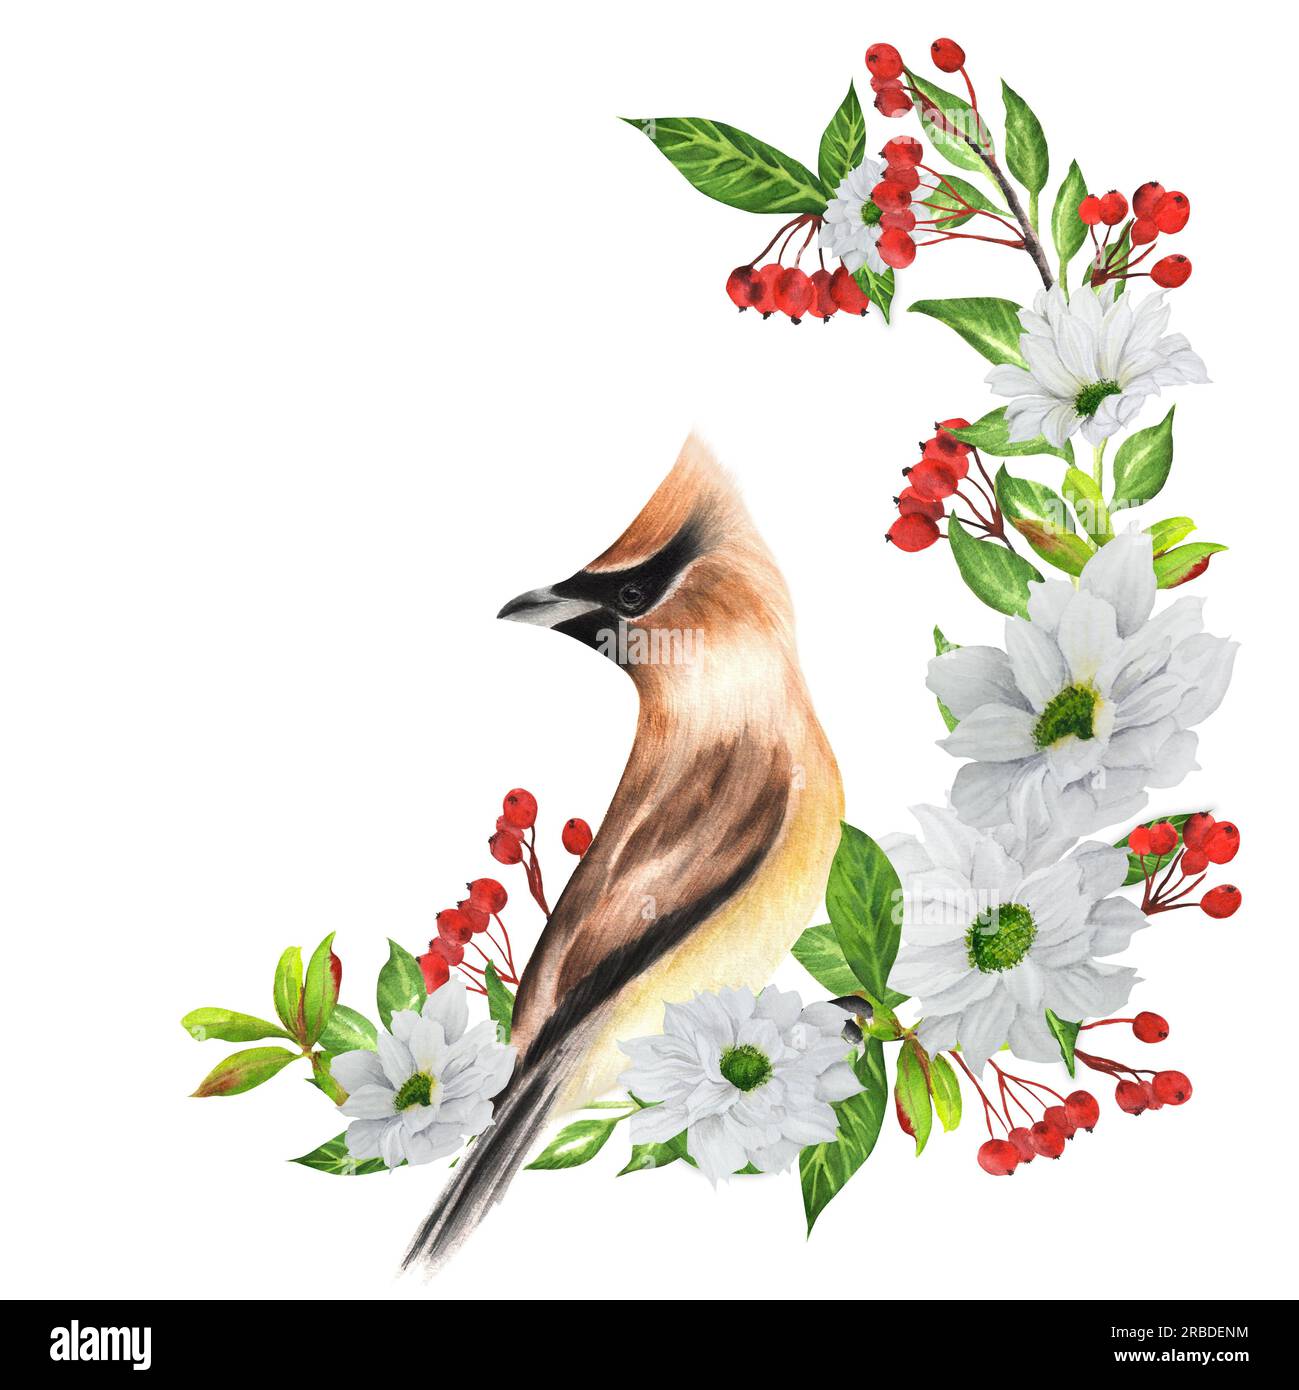 Hand-drawn watercolor illustration with waxwing birdwith white flowers and red berries. Two options - on white and transparent background. Stock Photo